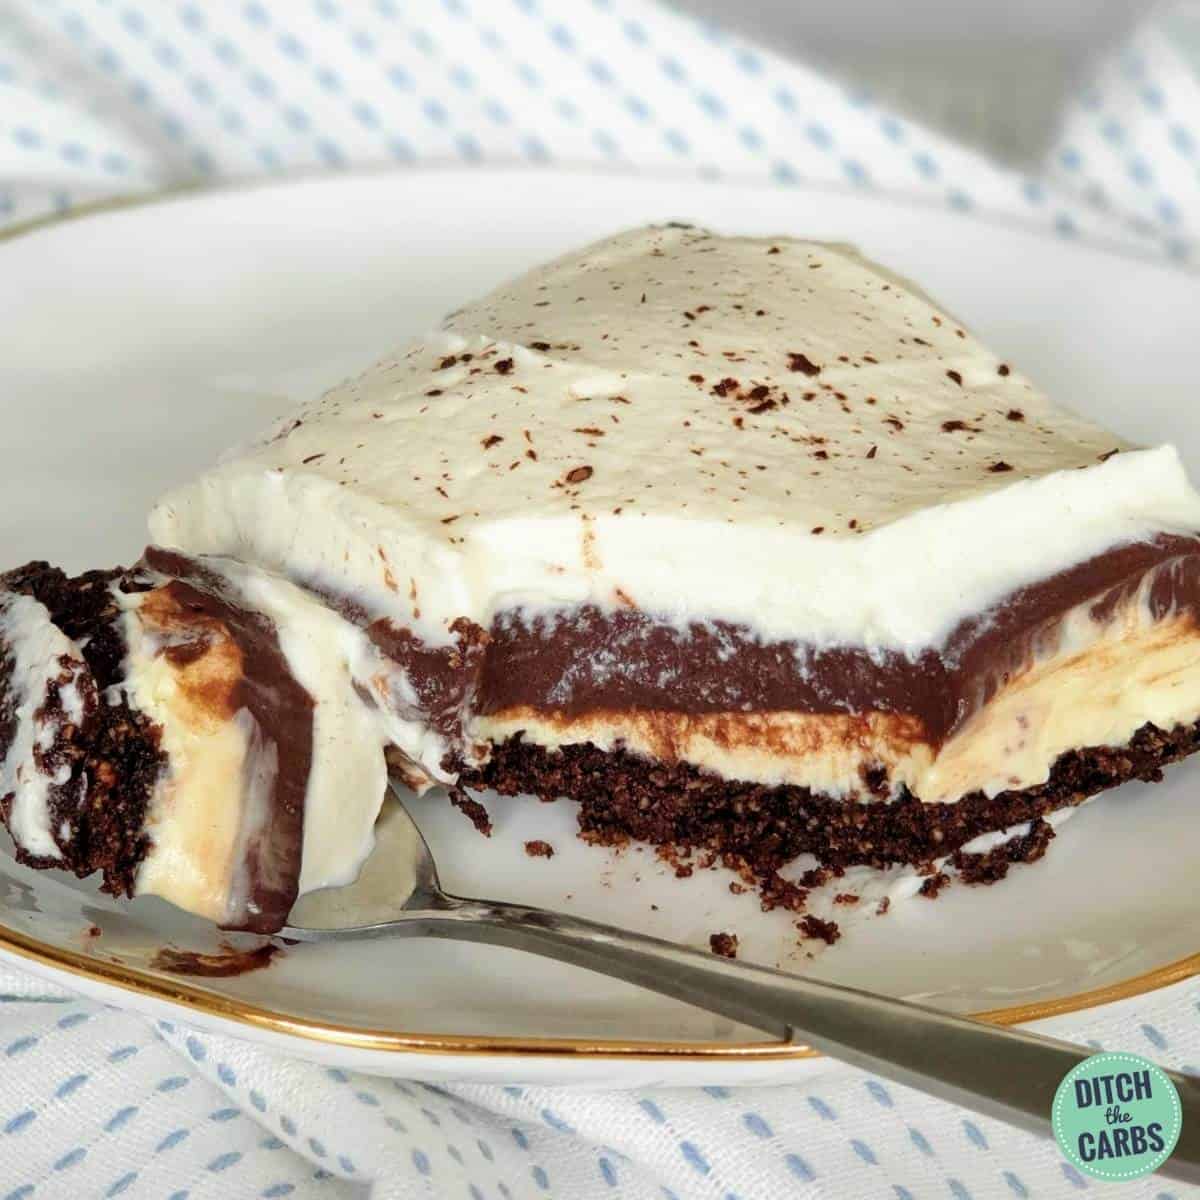 A slice of chocolate lasagna dessert sliced on a white plate and a fork with a bite taken